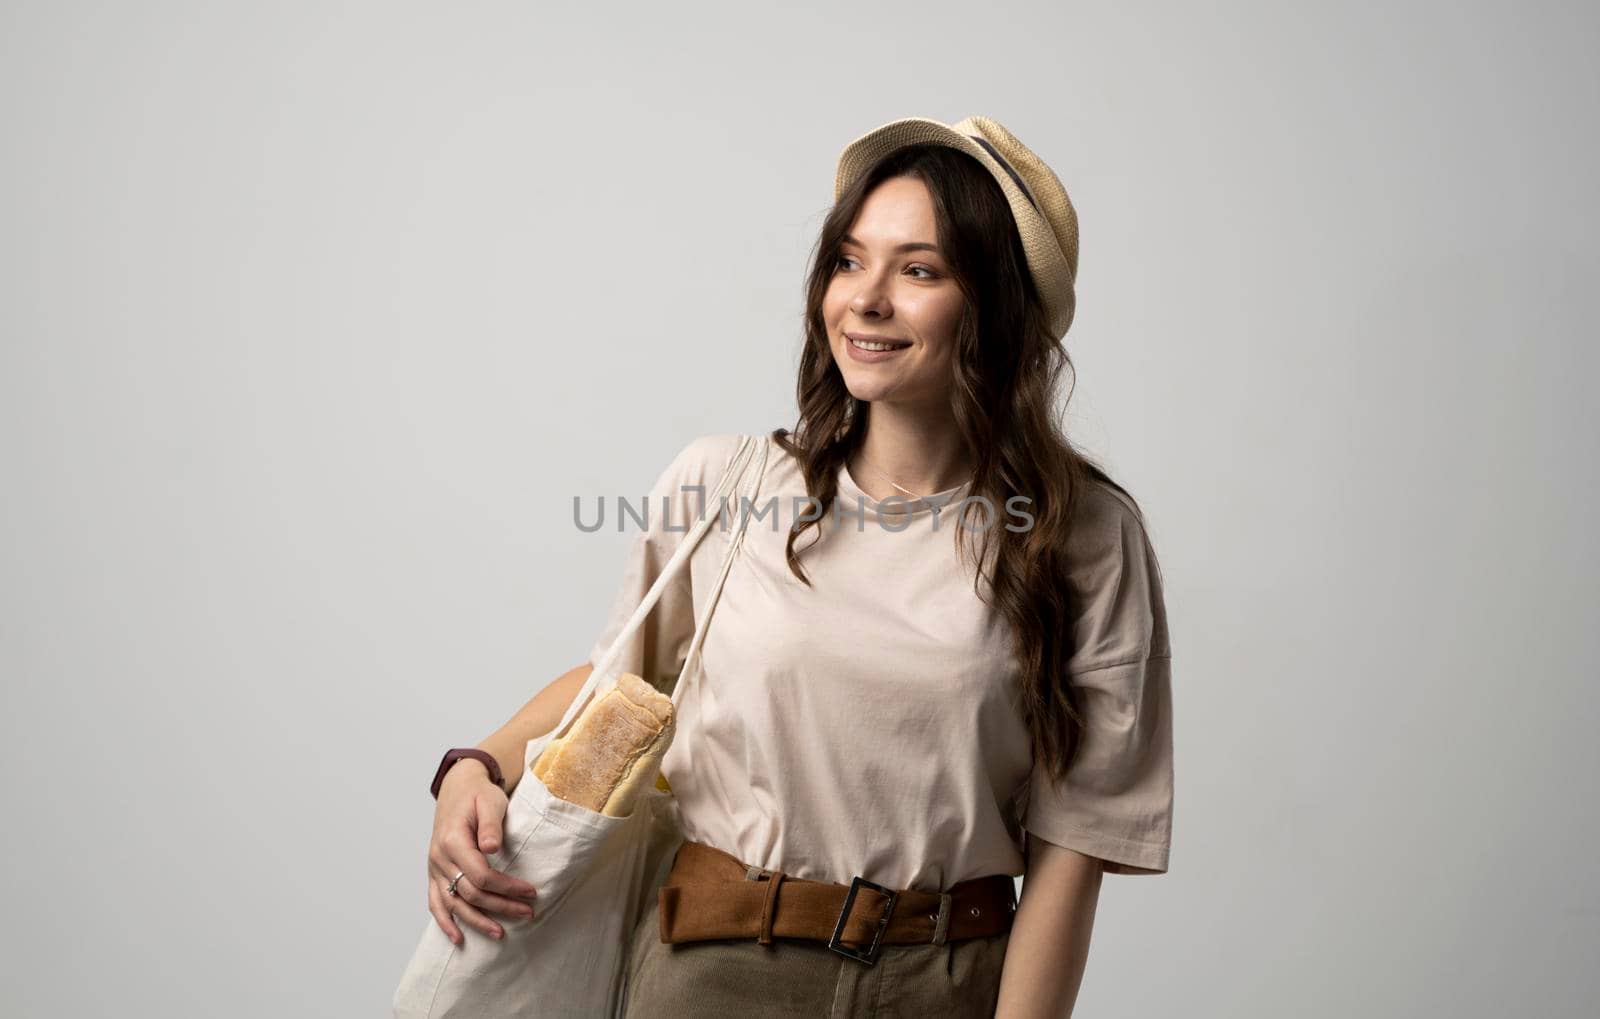 Smiling young woman in light summer clothes with a mesh eco bag full of vegetables, greens watching in a camera on a white studio background. Sustainable lifestyle. Eco friendly concept. Zero waste. by vovsht